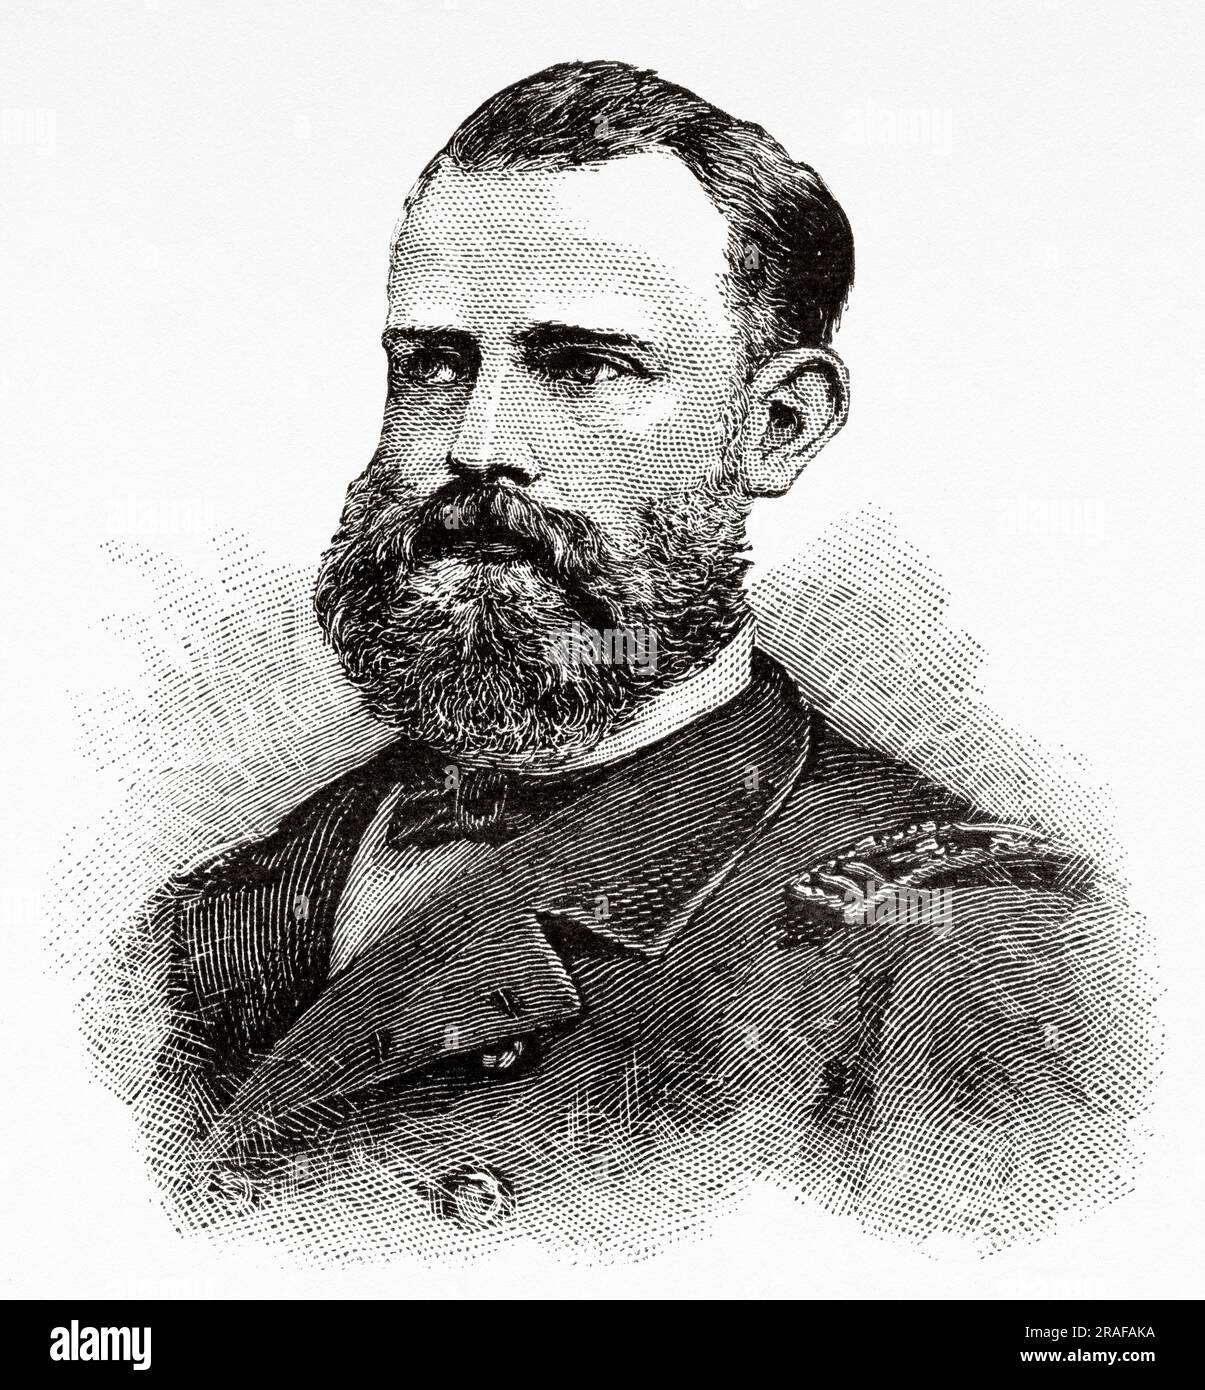 Charles Winans Chipp (1848 – 1881) was a United States Navy officer and explorer. The Jeannette expedition of 1879–1881, Journal of Captain George Washington De Long 1879-1881. Old 19th century engraving from Le Tour du Monde 1906 Stock Photo